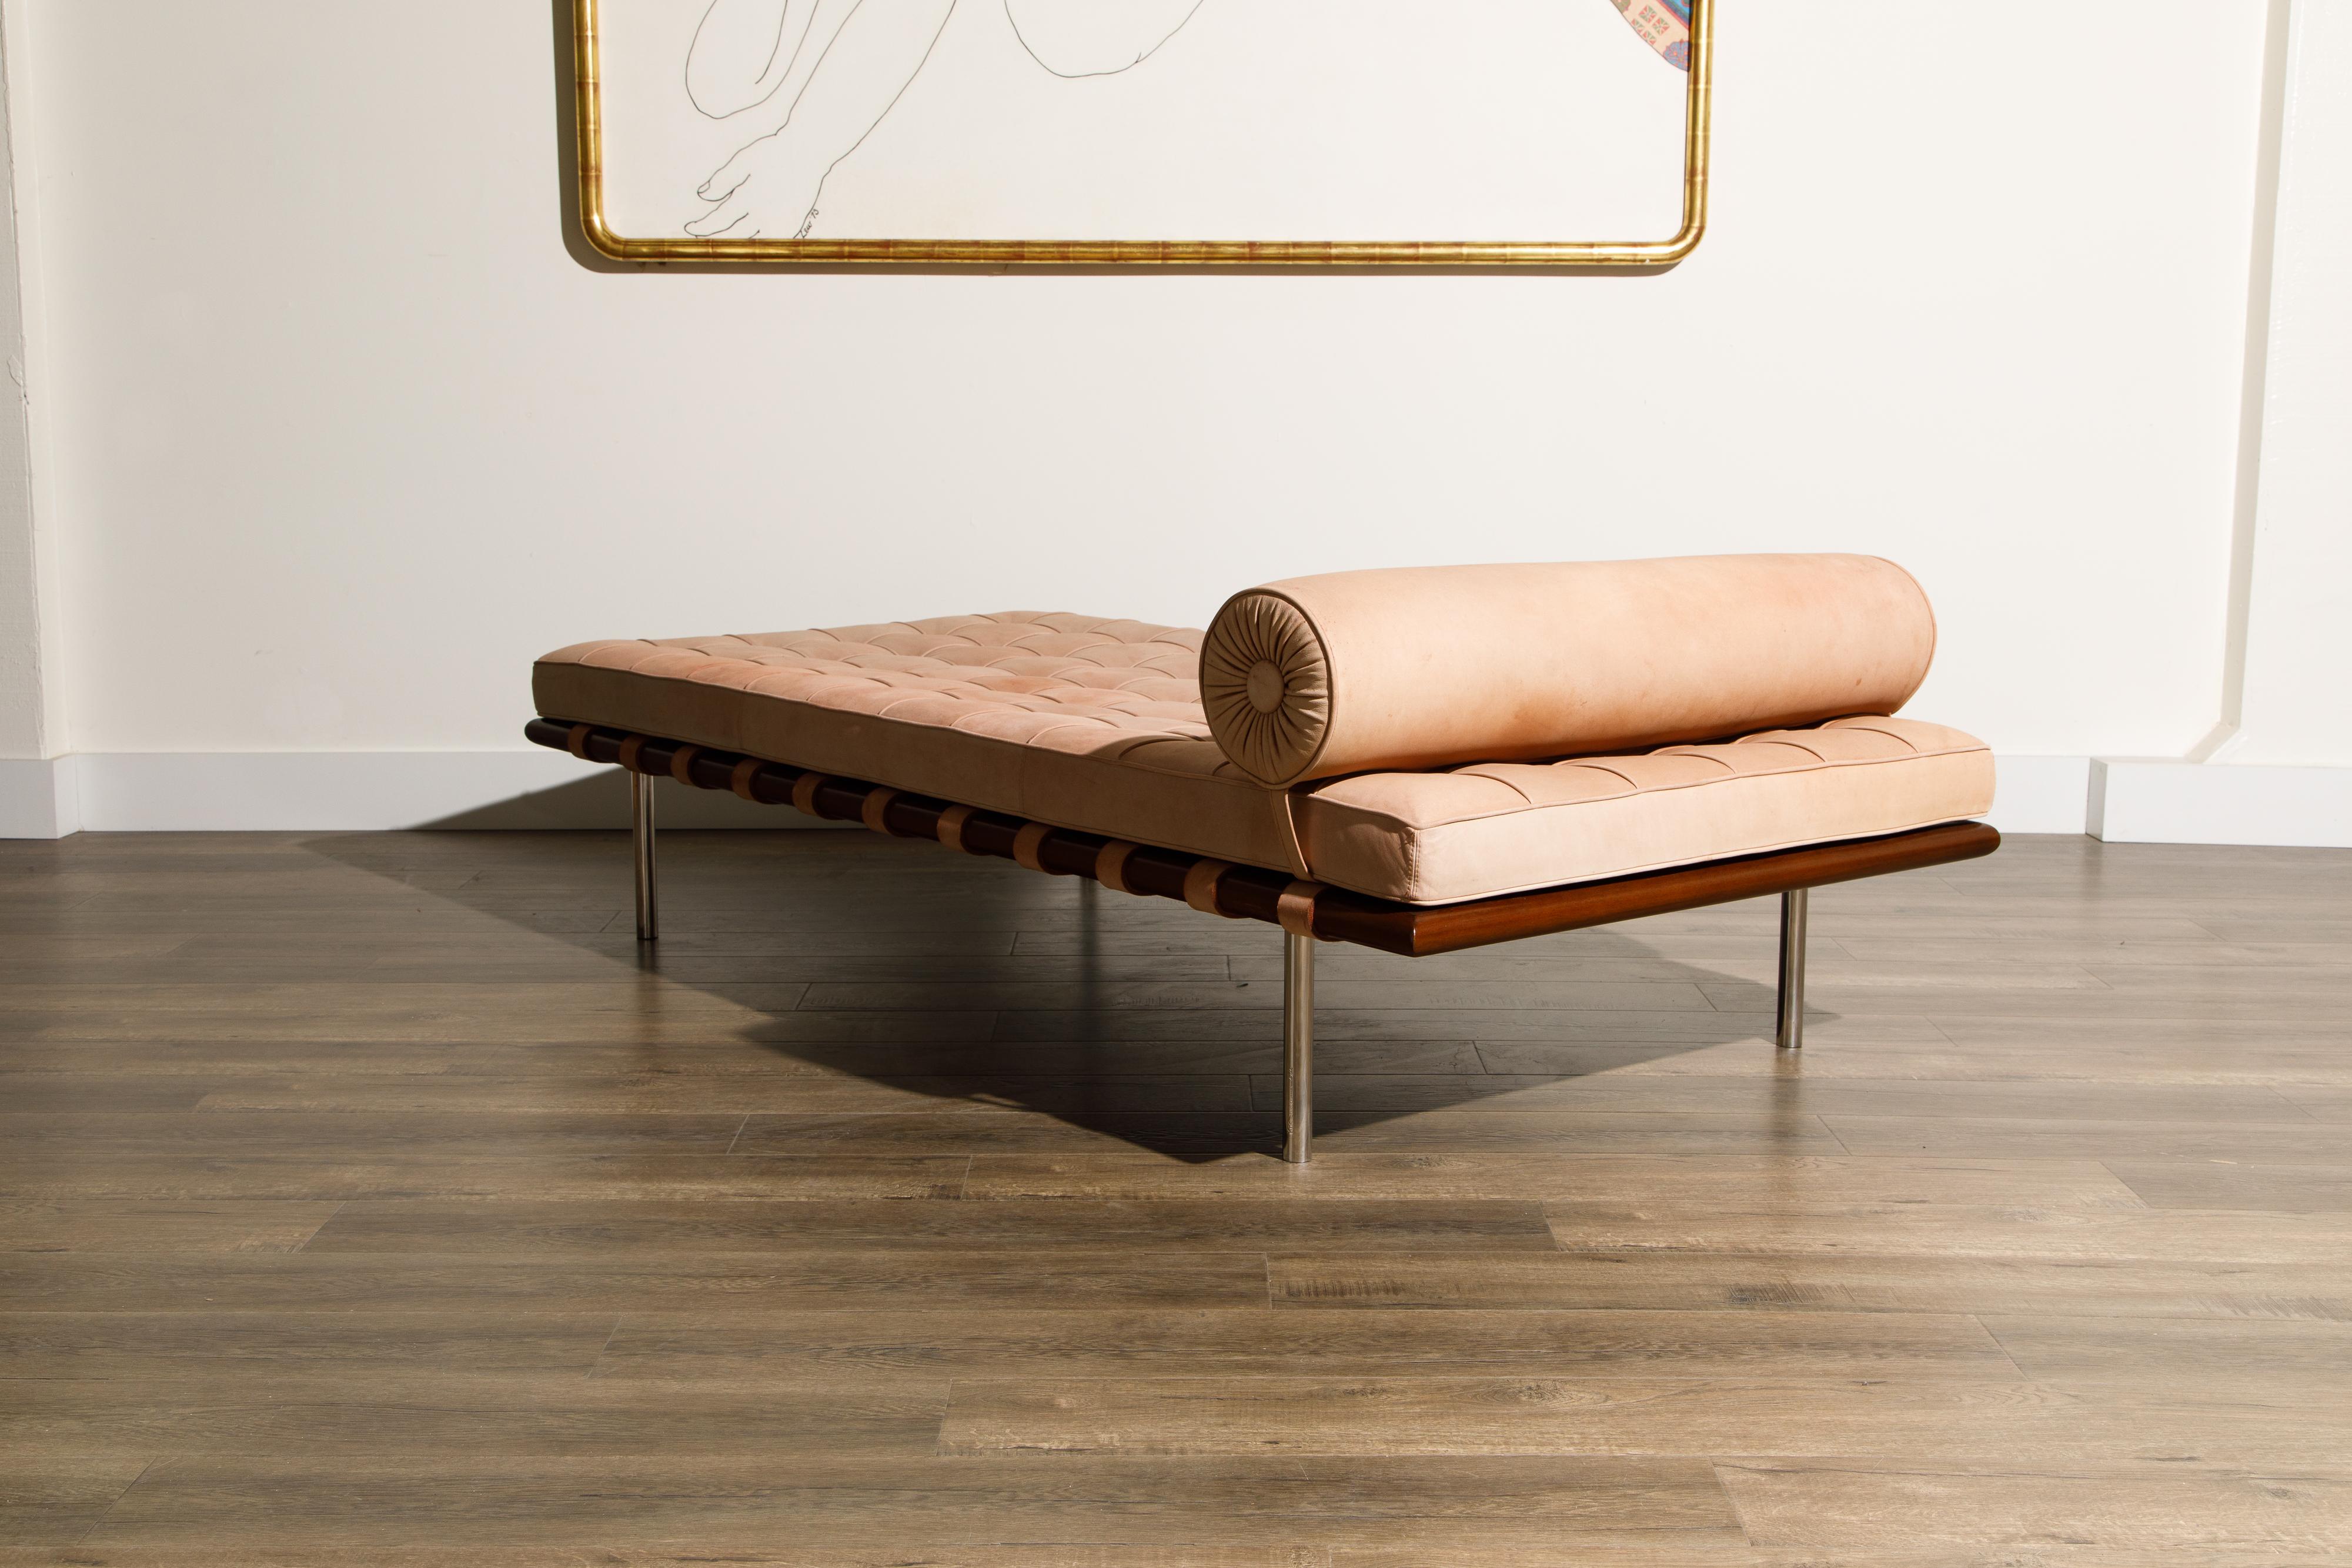 Late 20th Century Barcelona Daybed in Nude Suede by Ludwig Mies van der Rohe for Knoll, Signed 